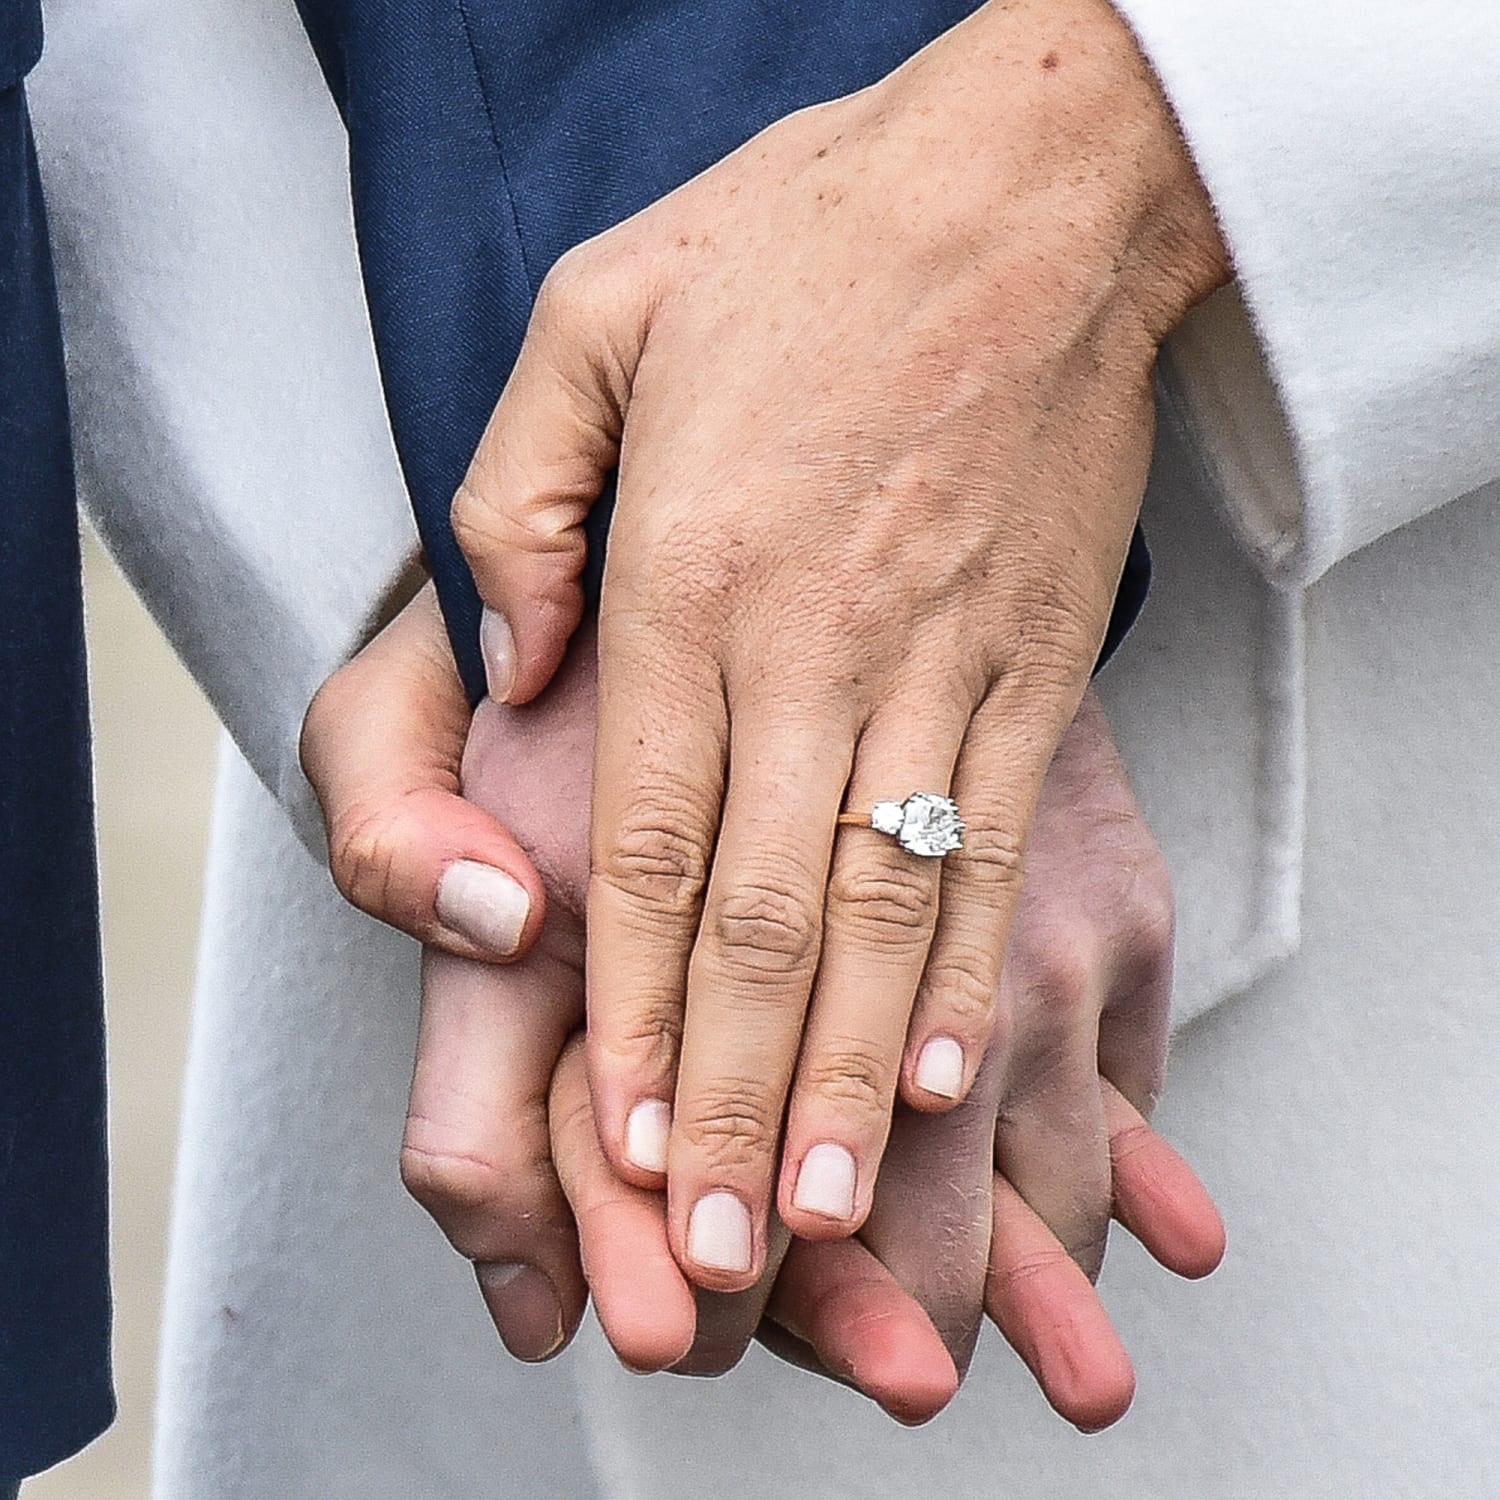 Just like Meghan, wives are blinging up their engagement rings